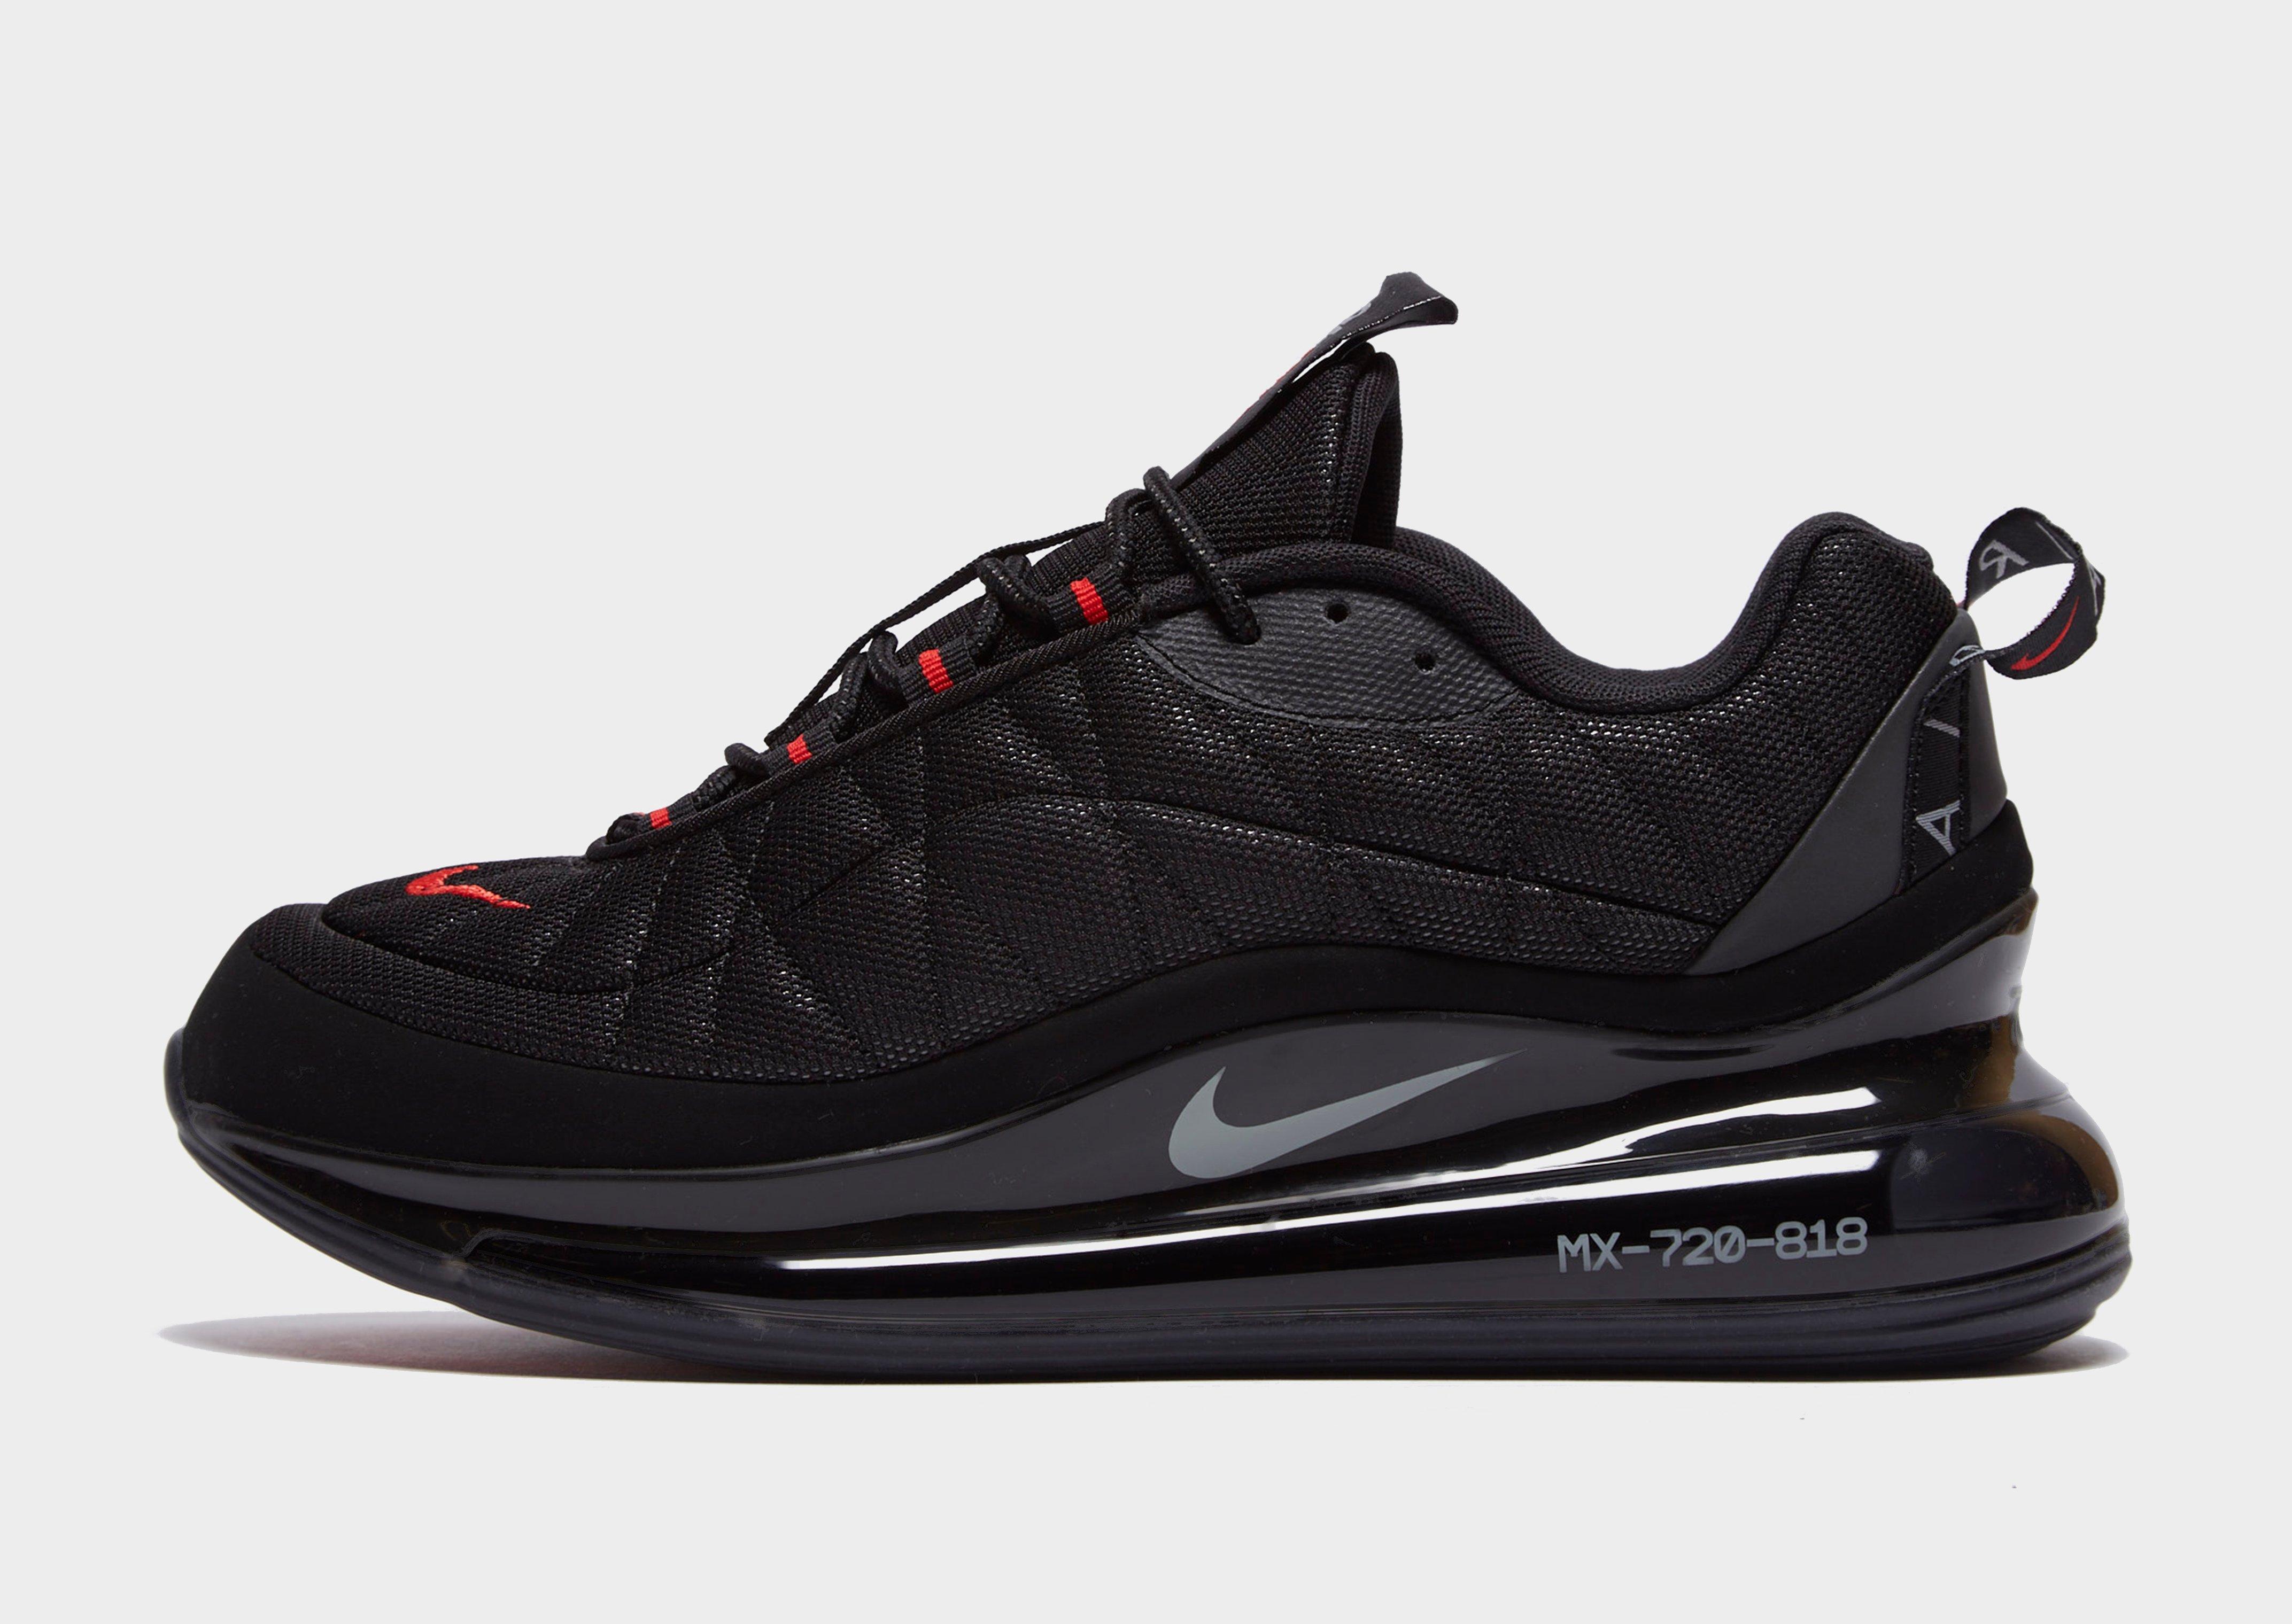 nike air max 720 818 black and red